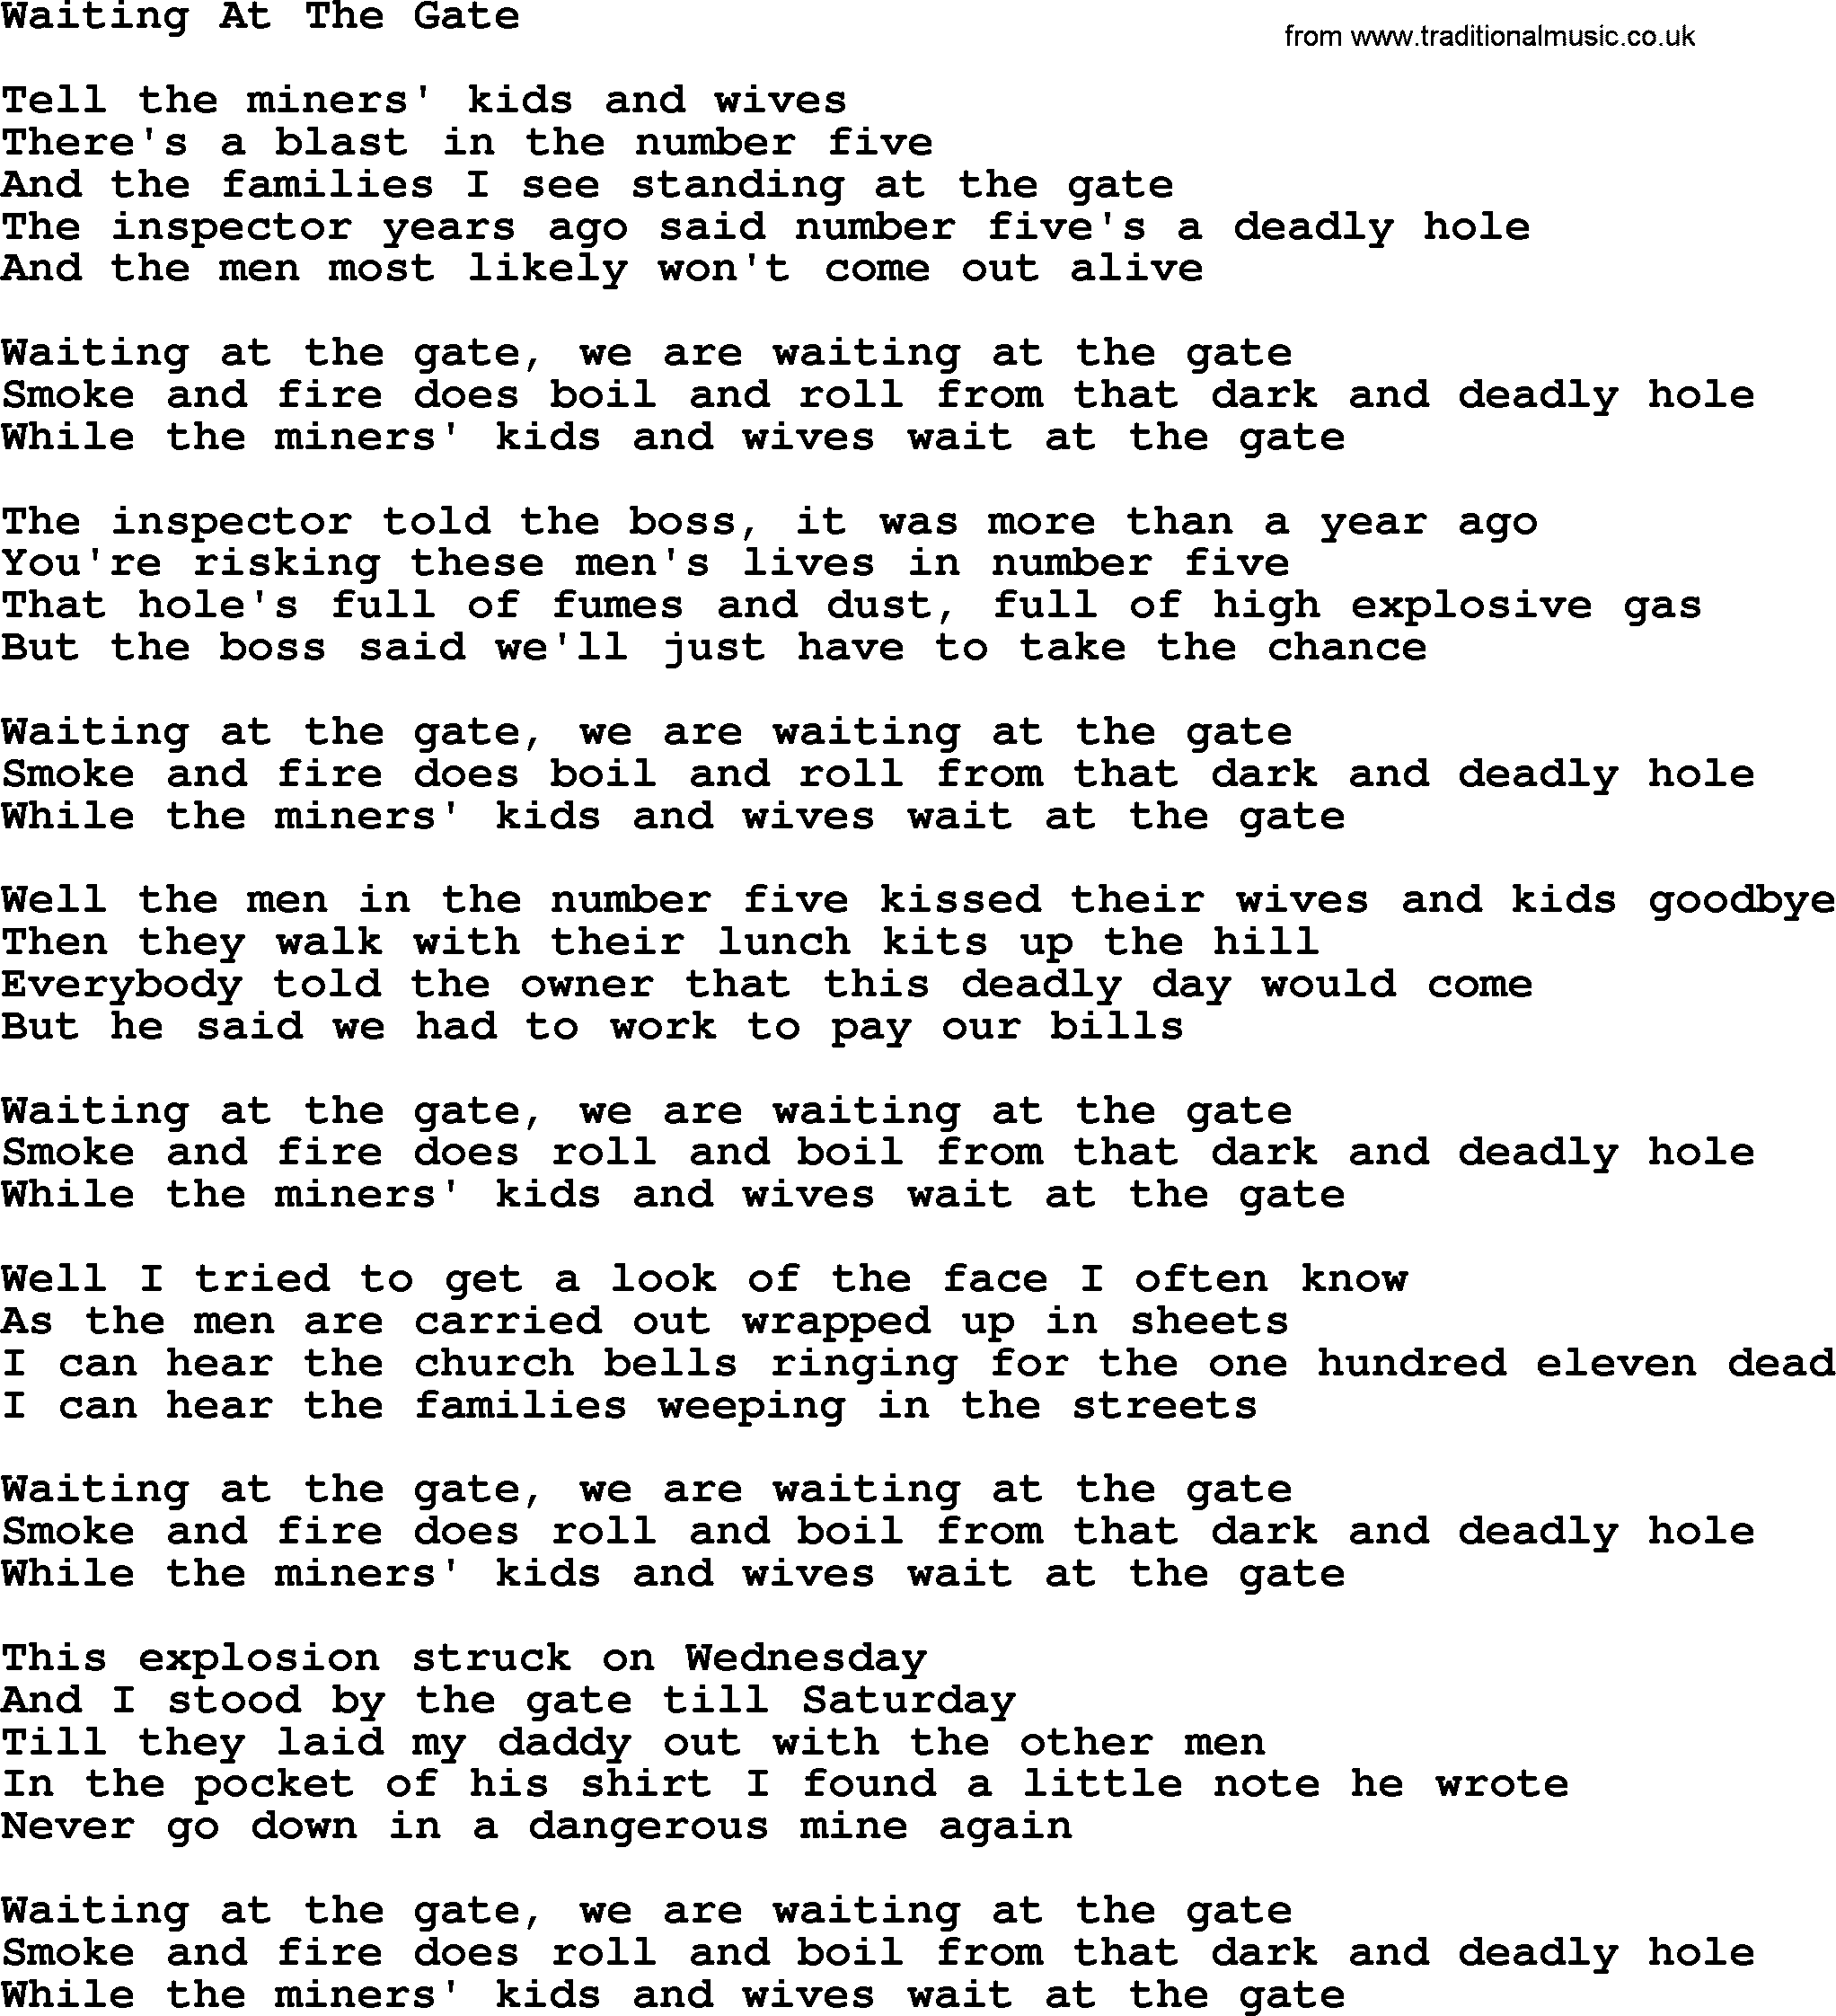 Woody Guthrie song Waiting At The Gate lyrics